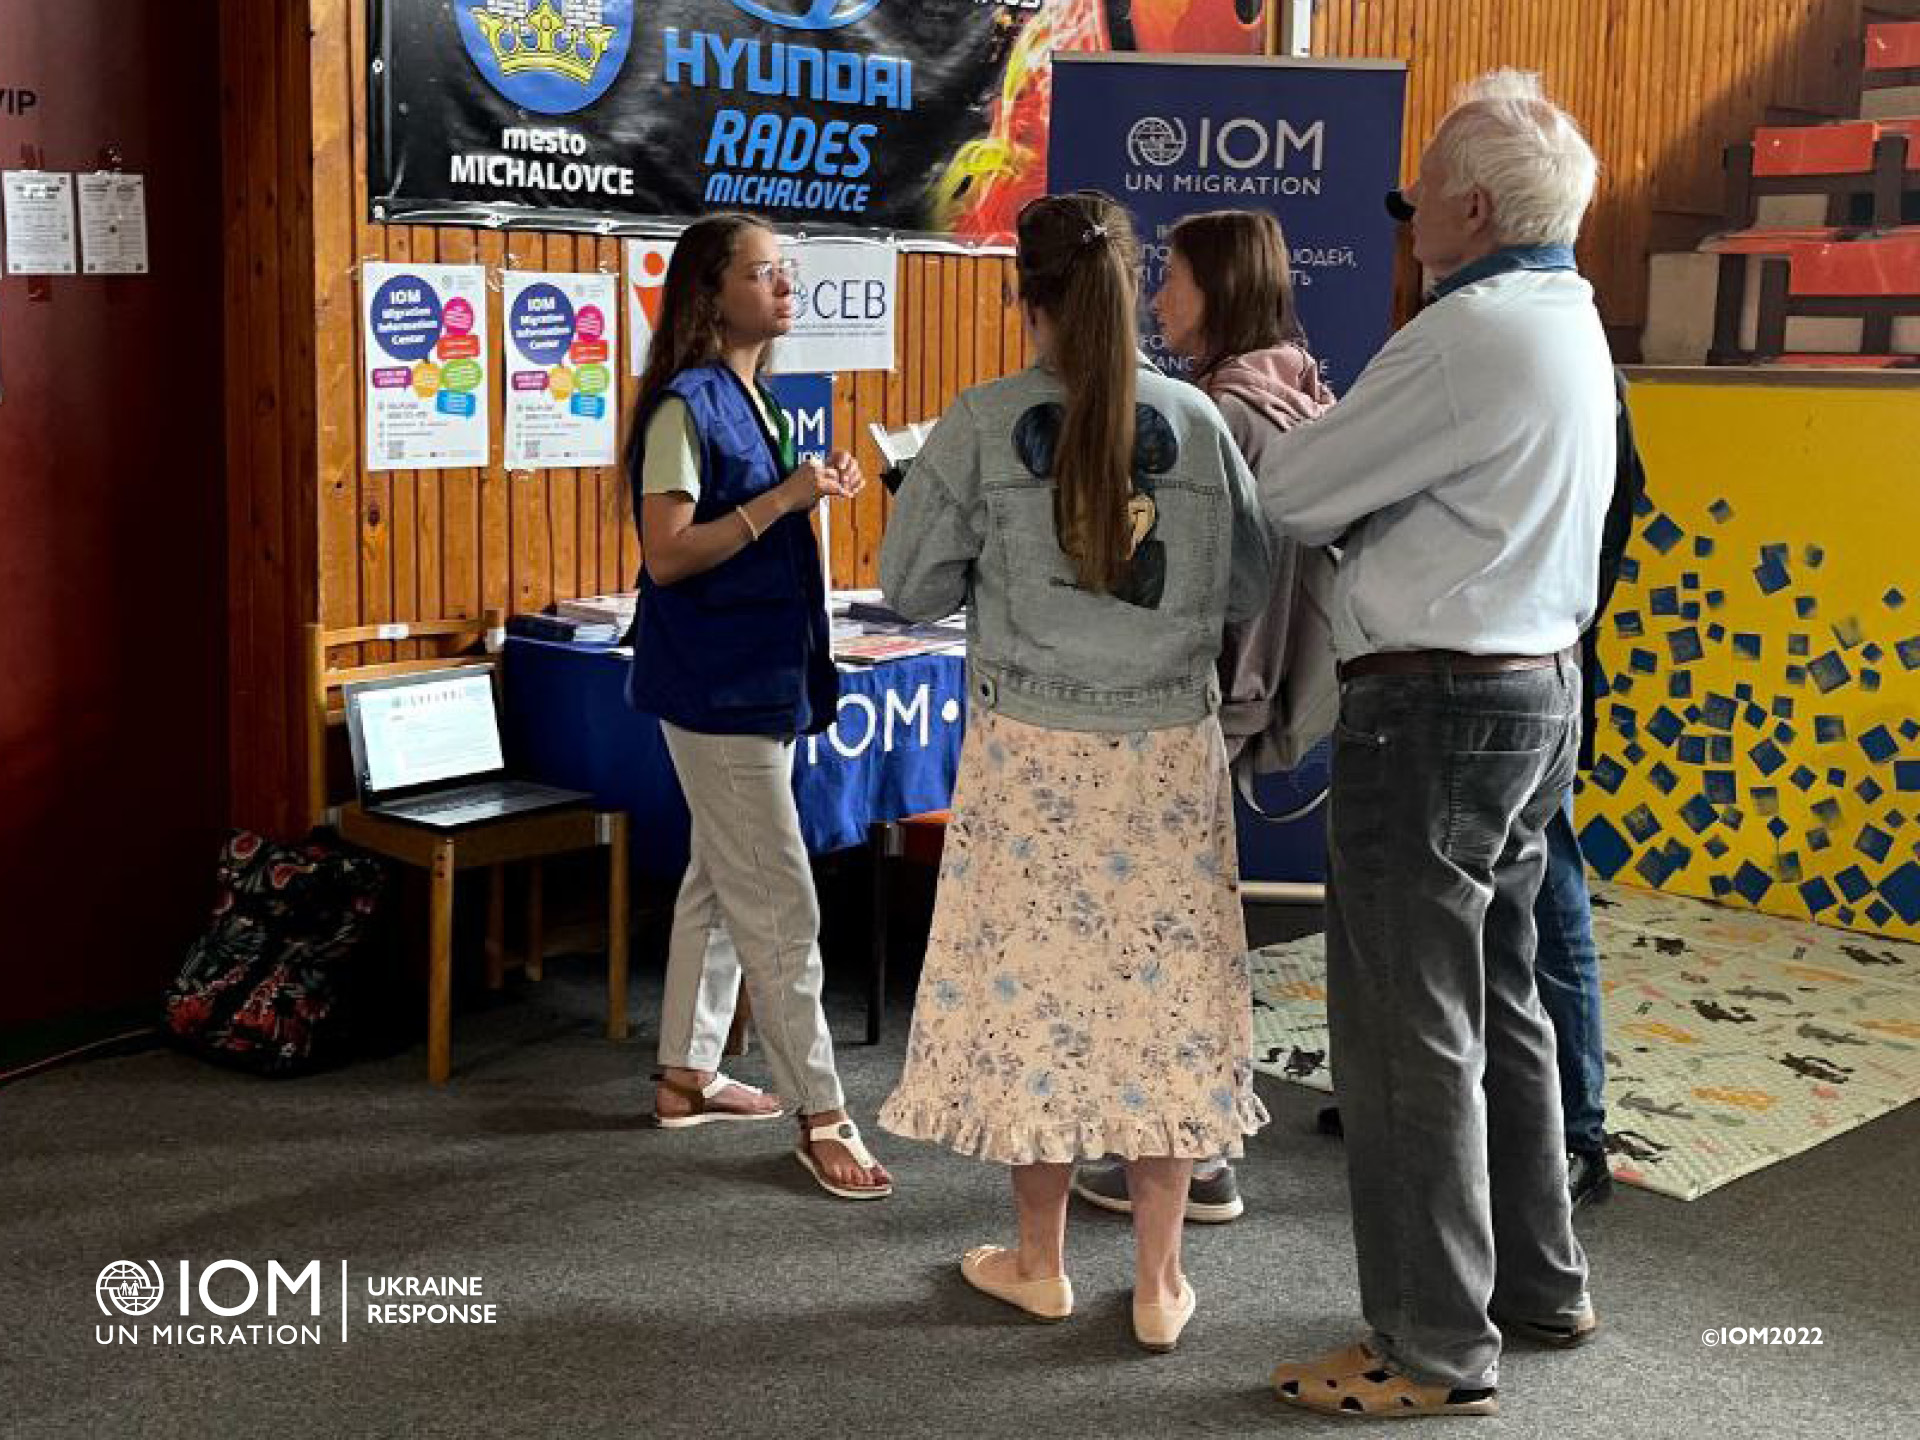 Yelyzaveta providing counselling to people from Ukraine at the Michalovce Registration Centre. Photo © International Organization for Migration (IOM) 2022.